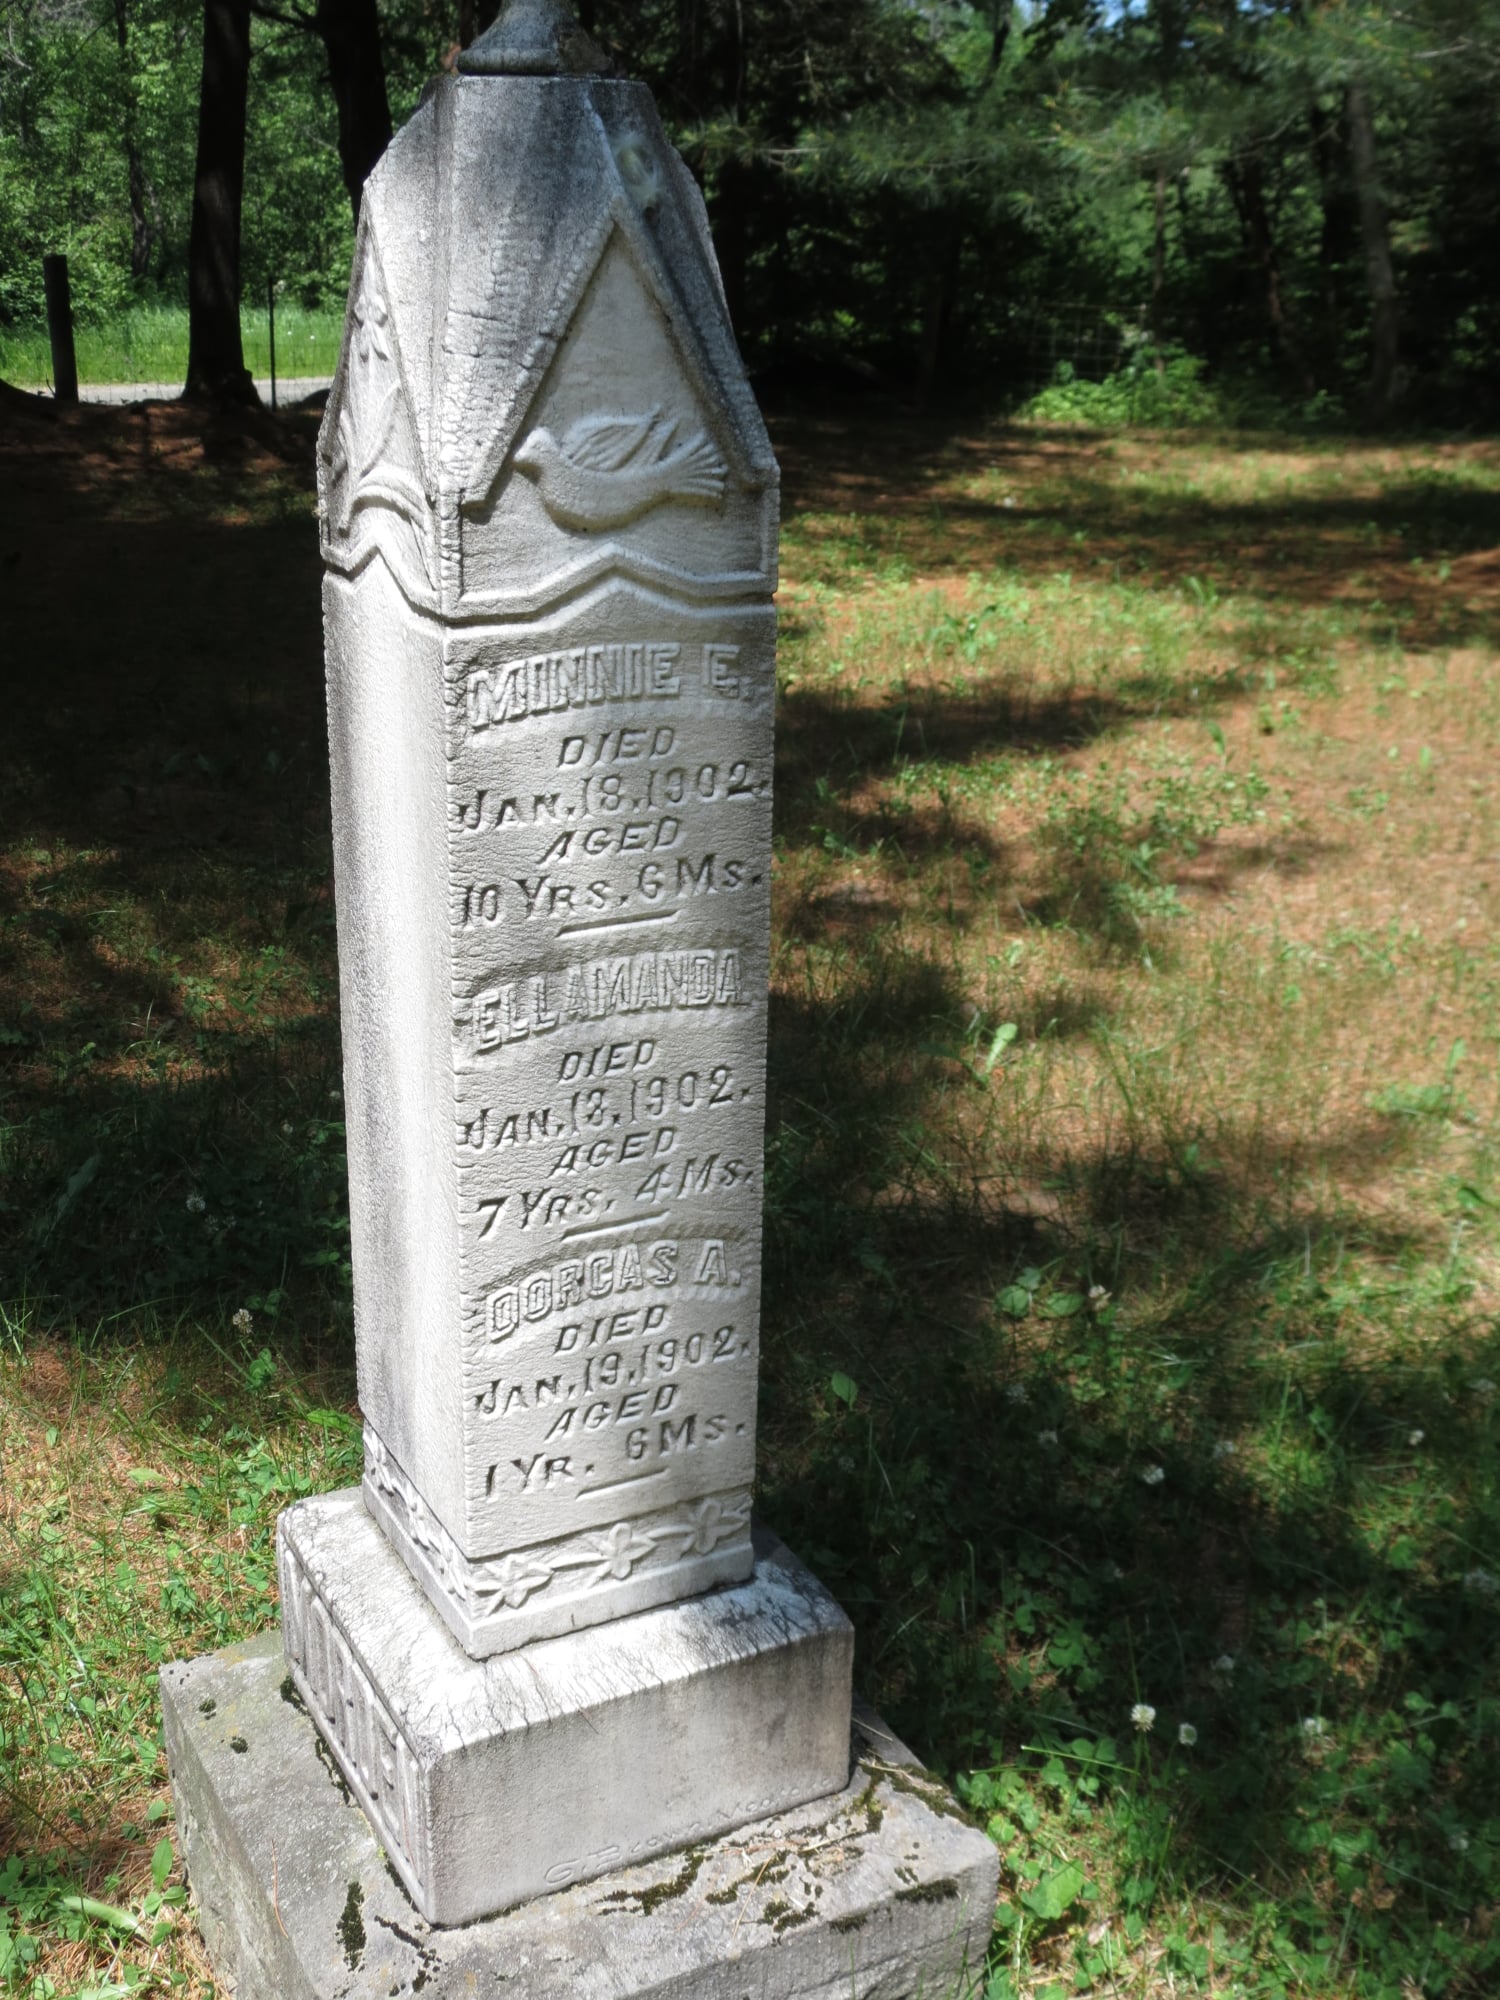 the tall white gravestone marker listing several names from the Morden family, surrounded by green grass and shade trees in the Dufferin Cemetery